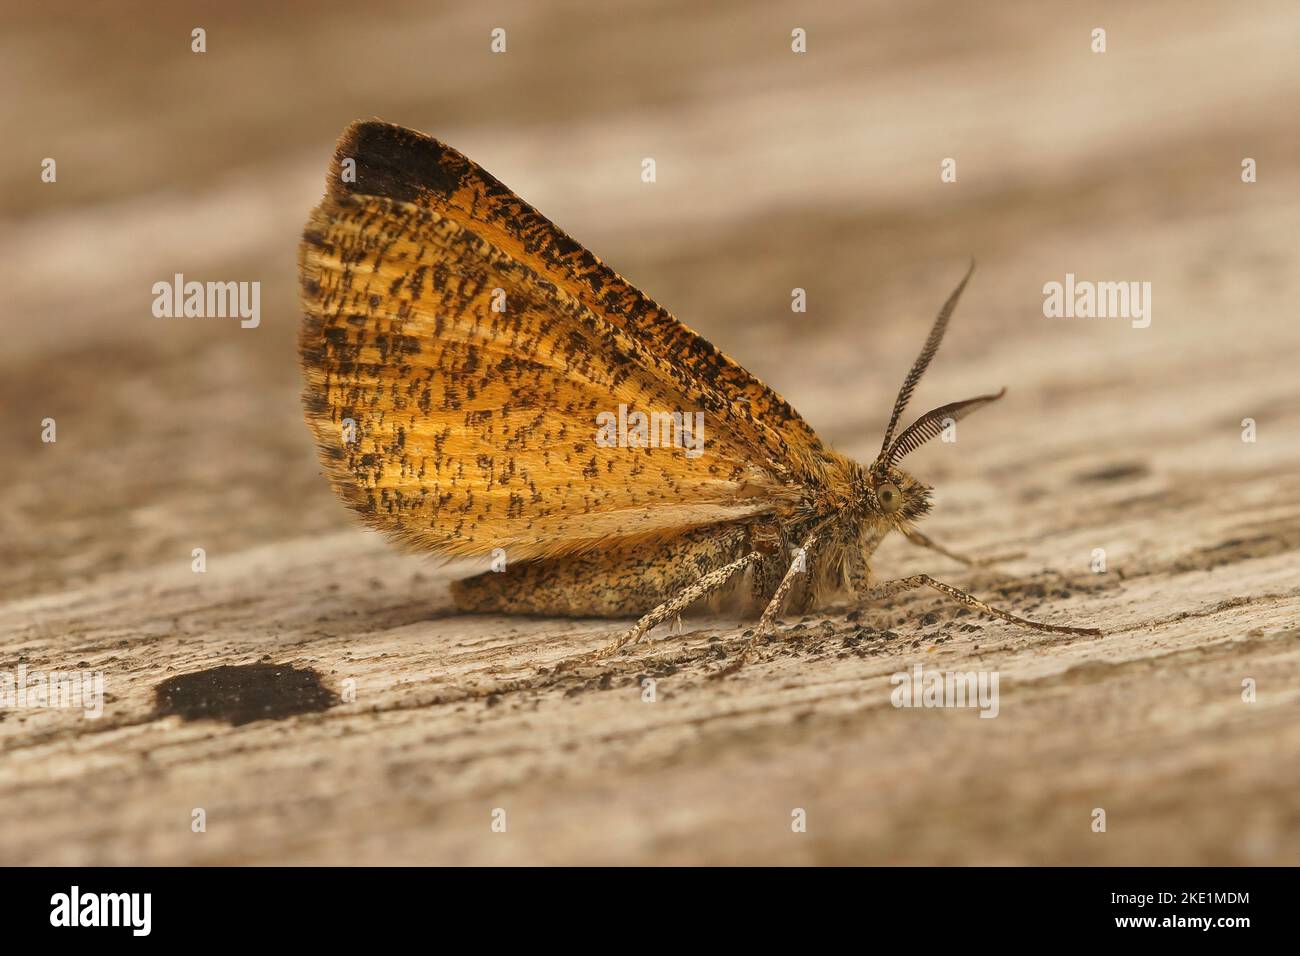 A close up of the common heath moth (Ematurga atomaria) on blurred background Stock Photo